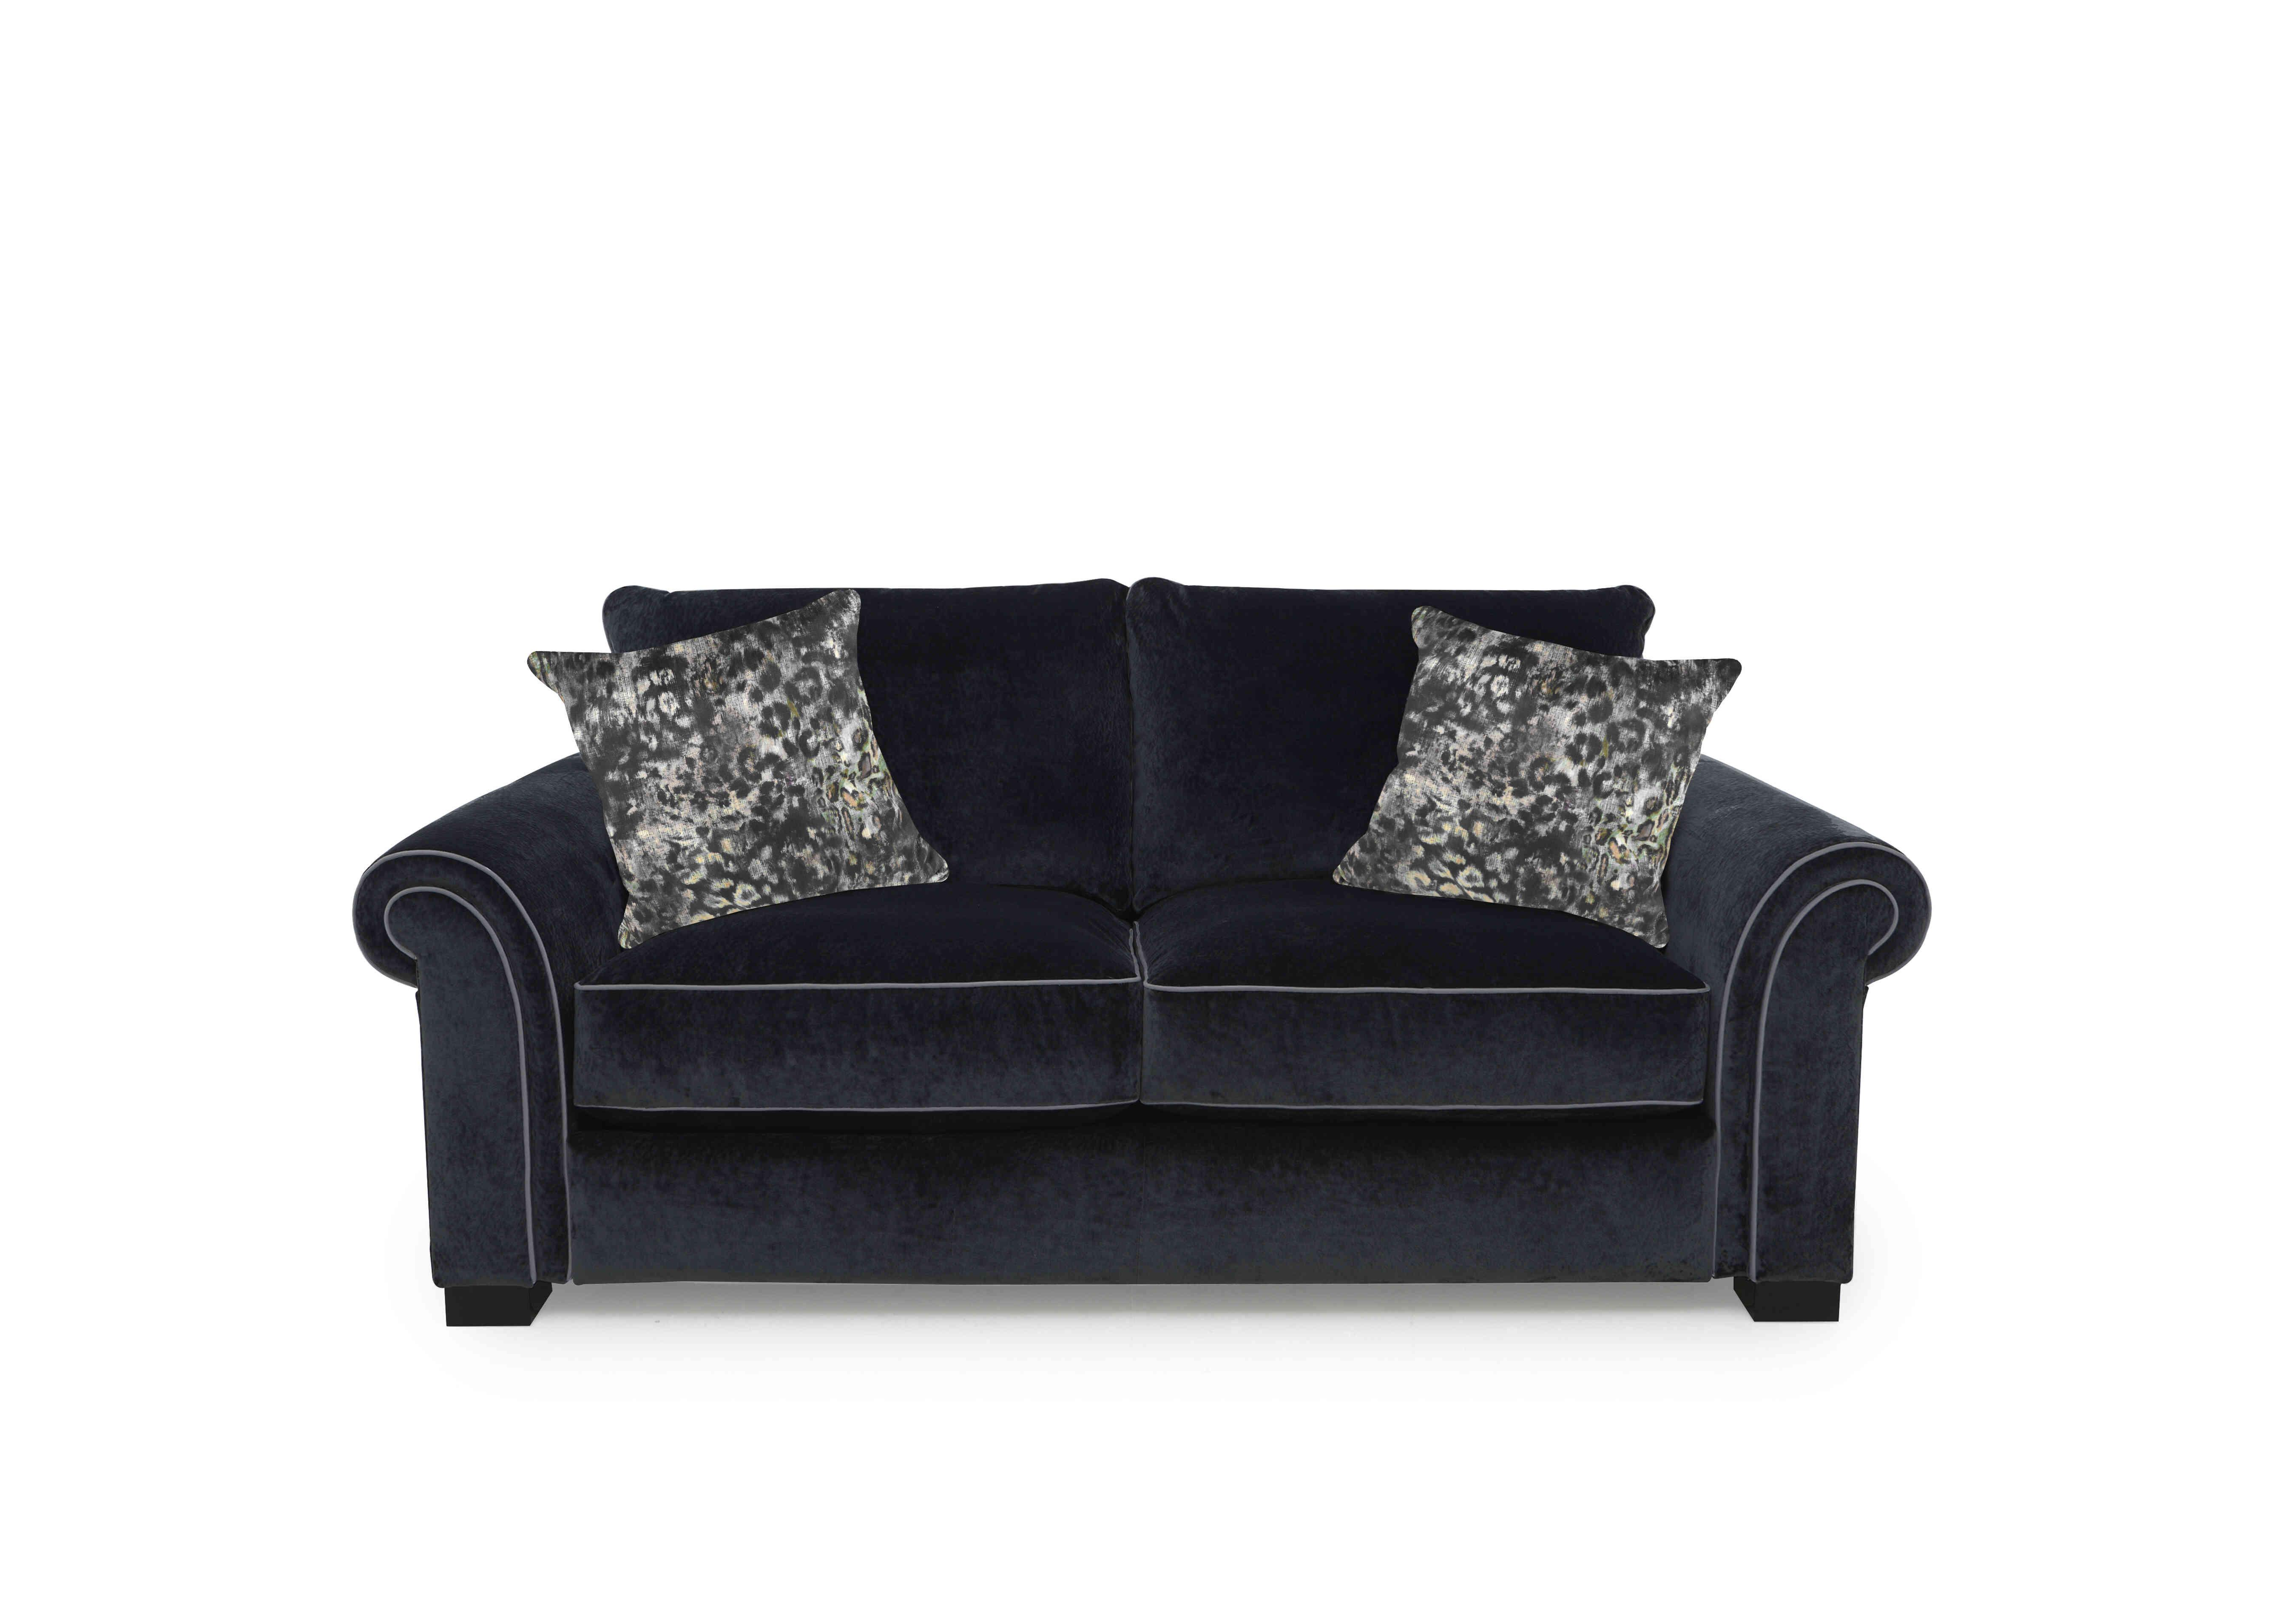 Modern Classics St James Park 2 Seater Sofa in Verona Charcoal Cp Mf on Furniture Village